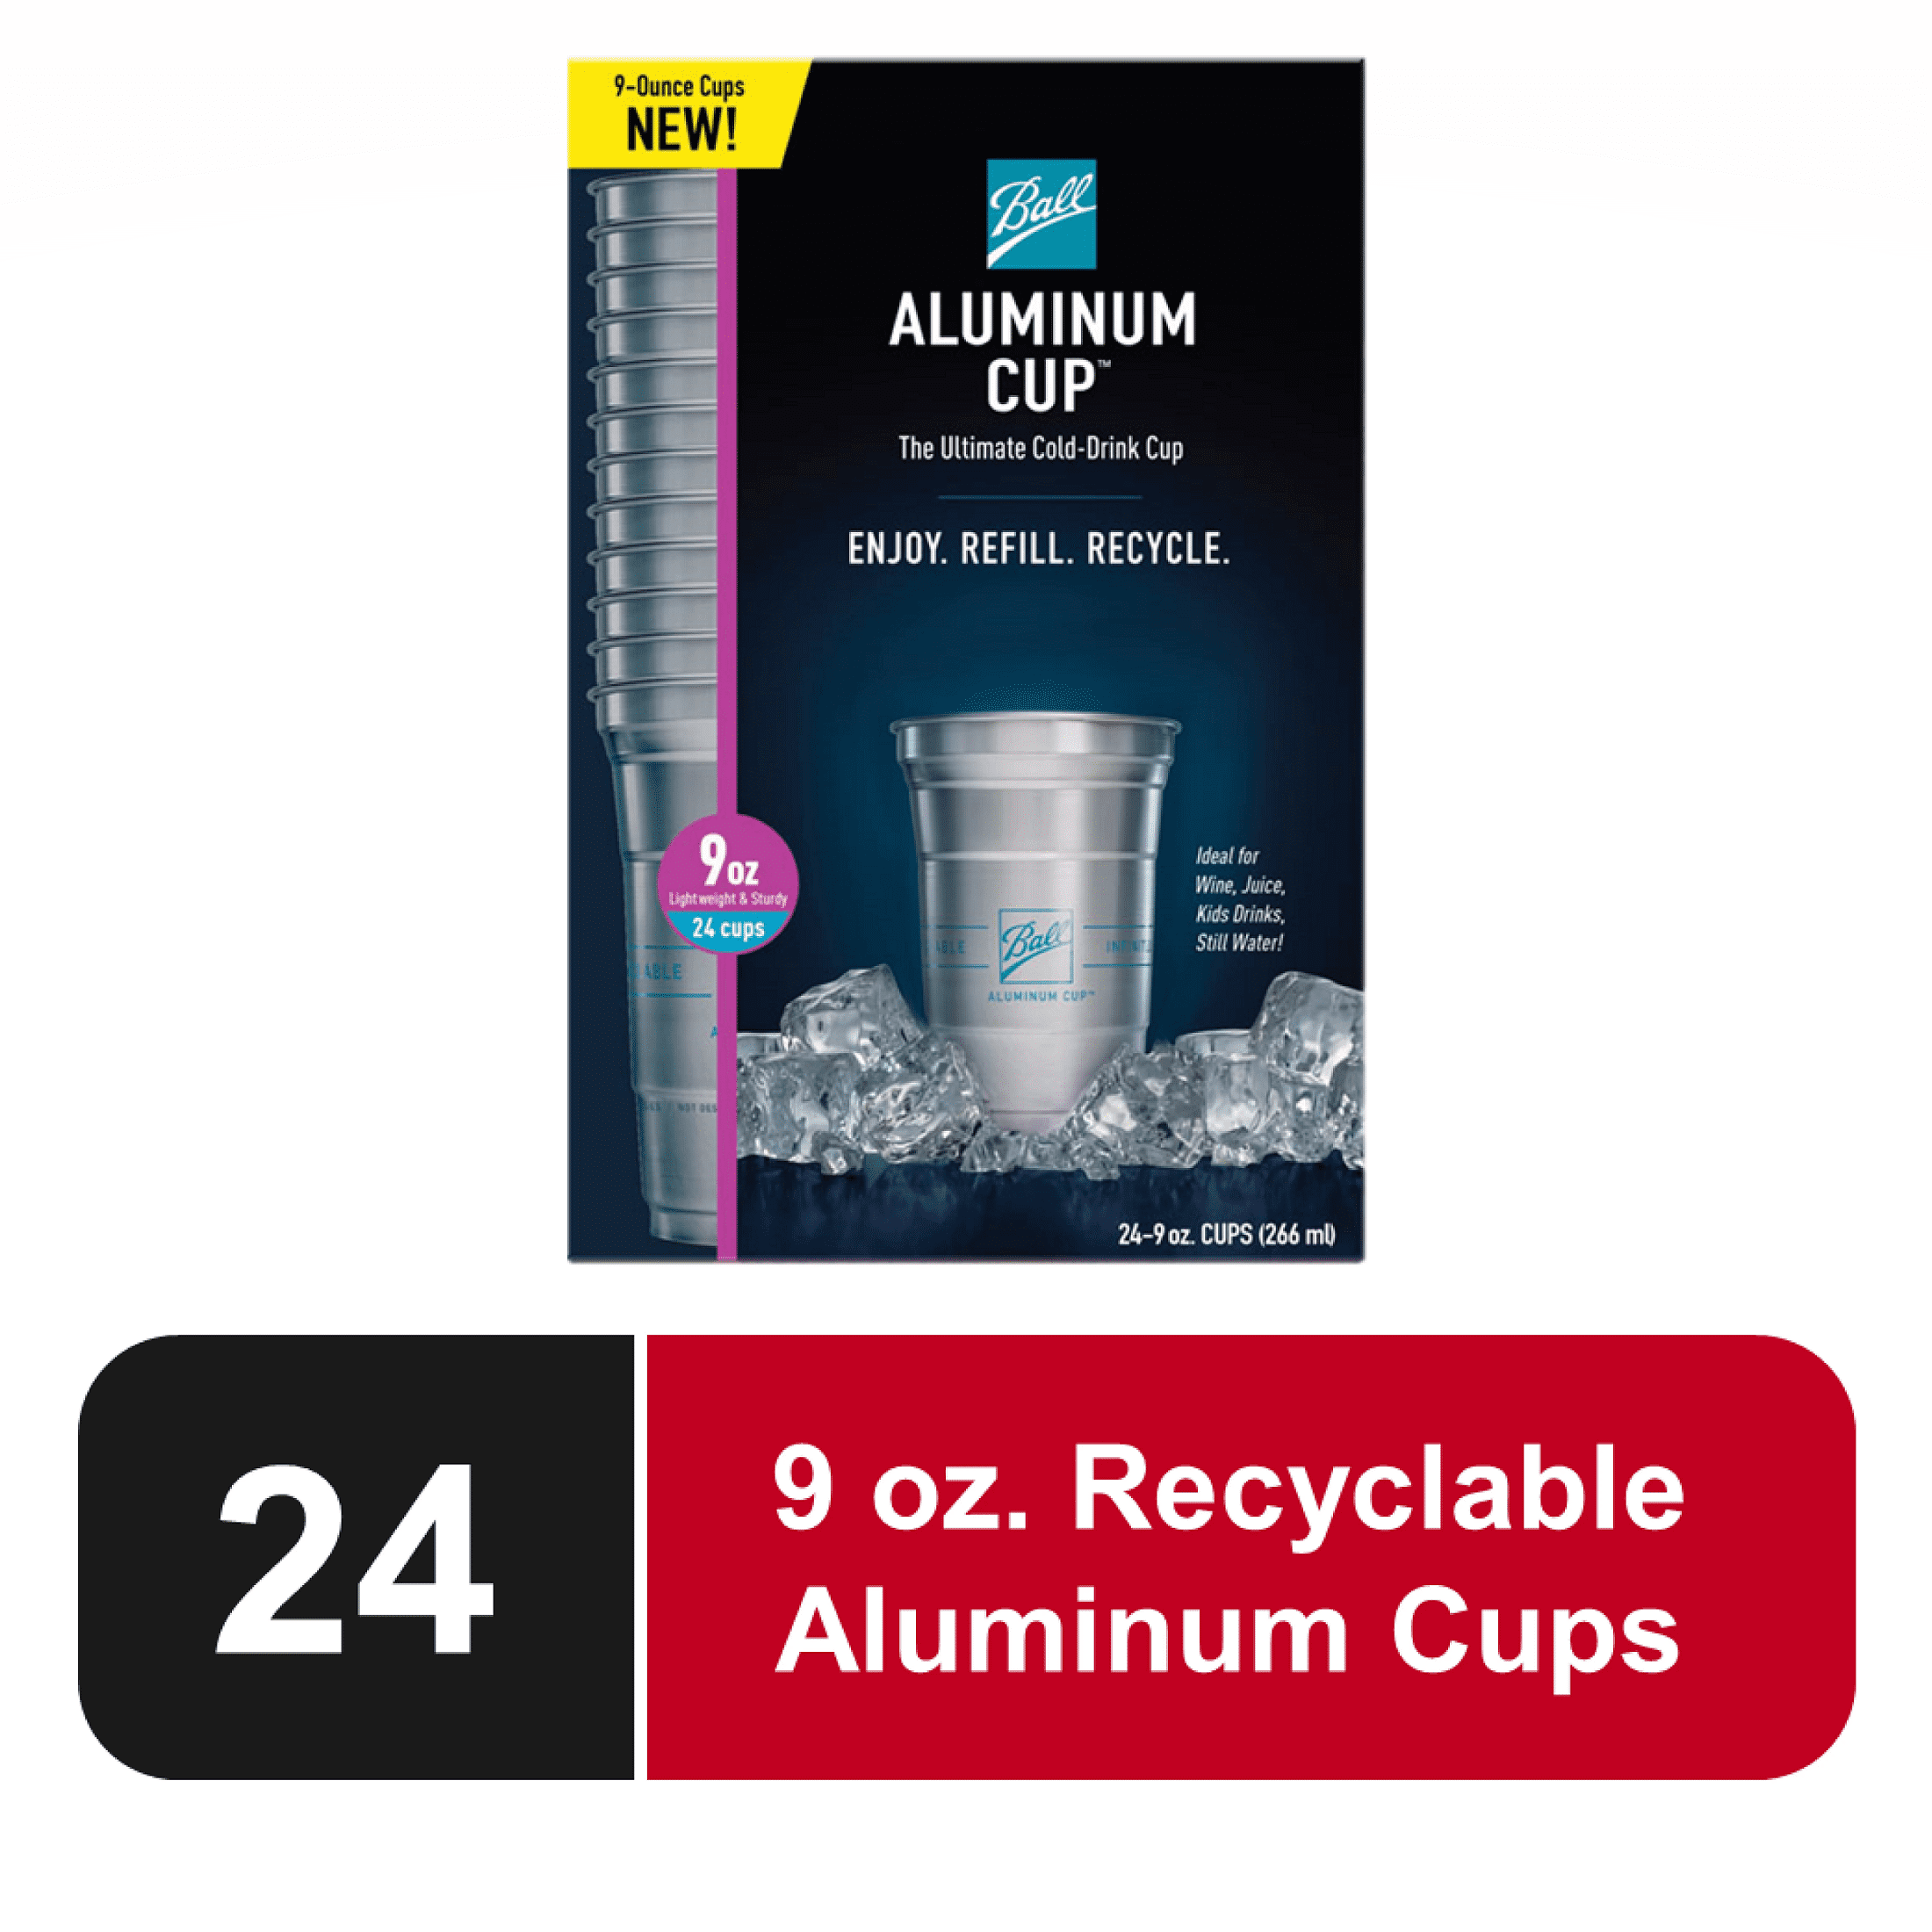 Ball Aluminum Cup Recyclable Party Cups, 16 oz, 24 pack